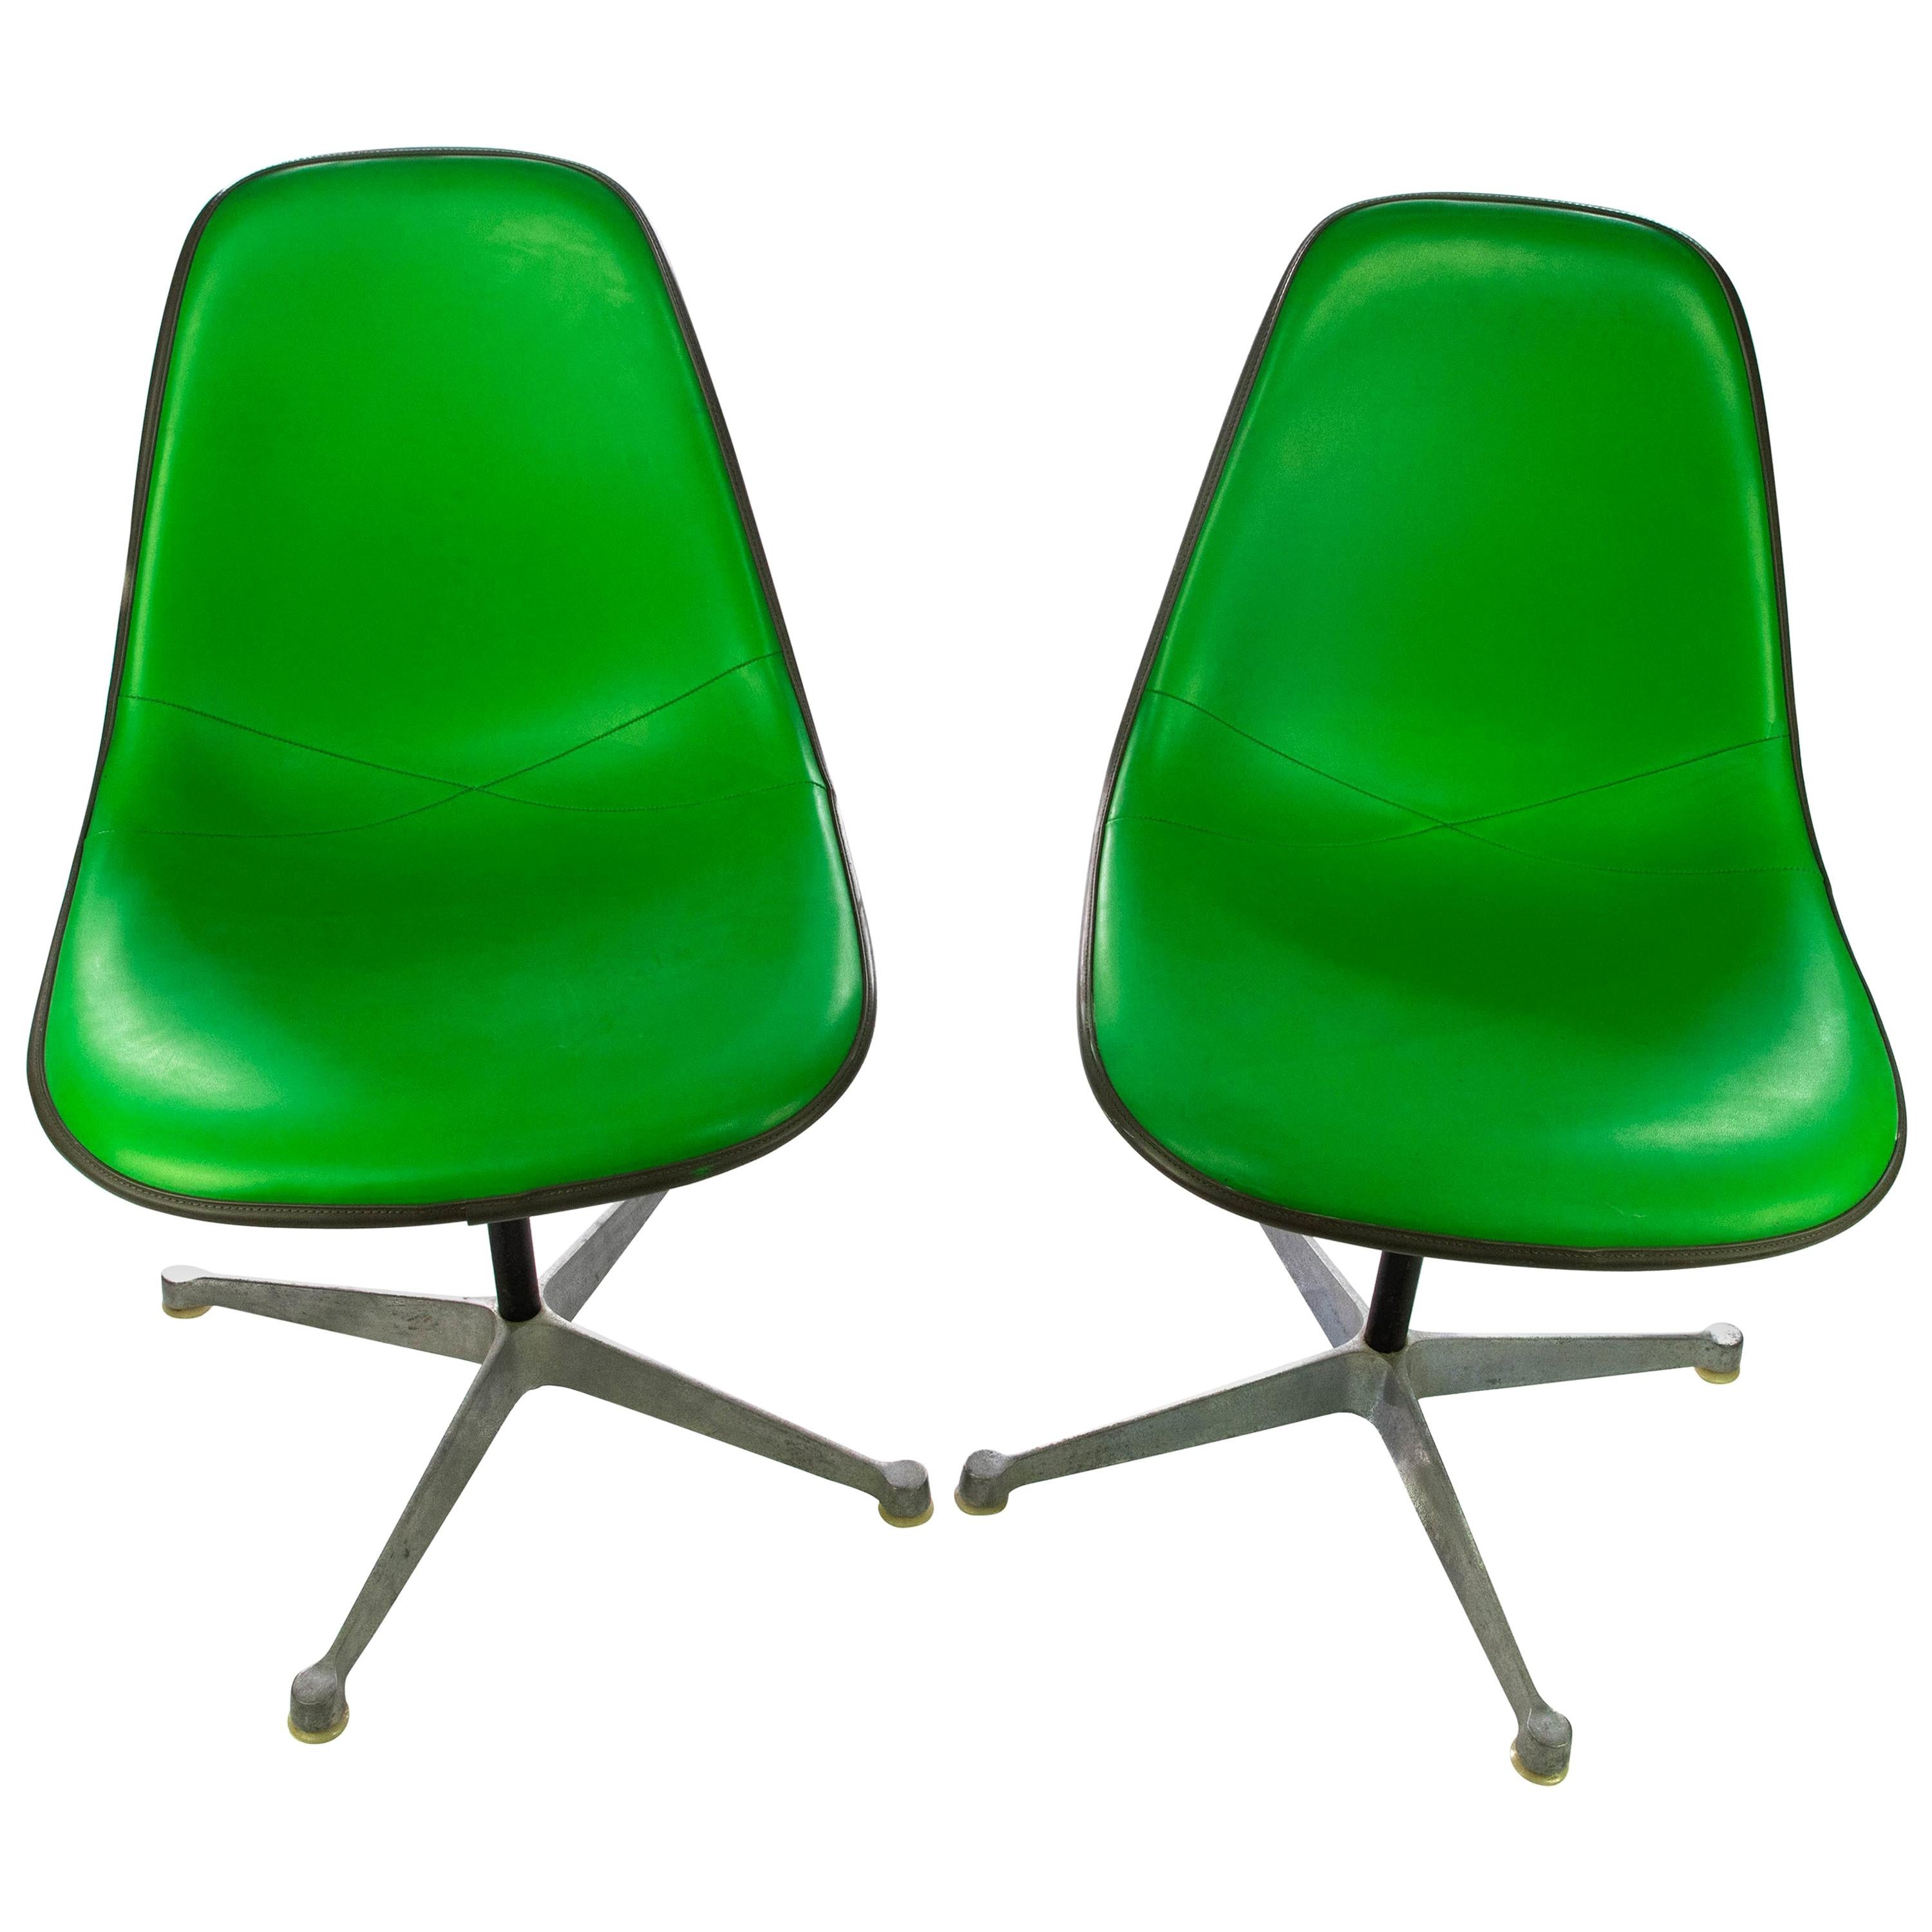 Eames for Herman Miller Bright Green Chairs im Angebot